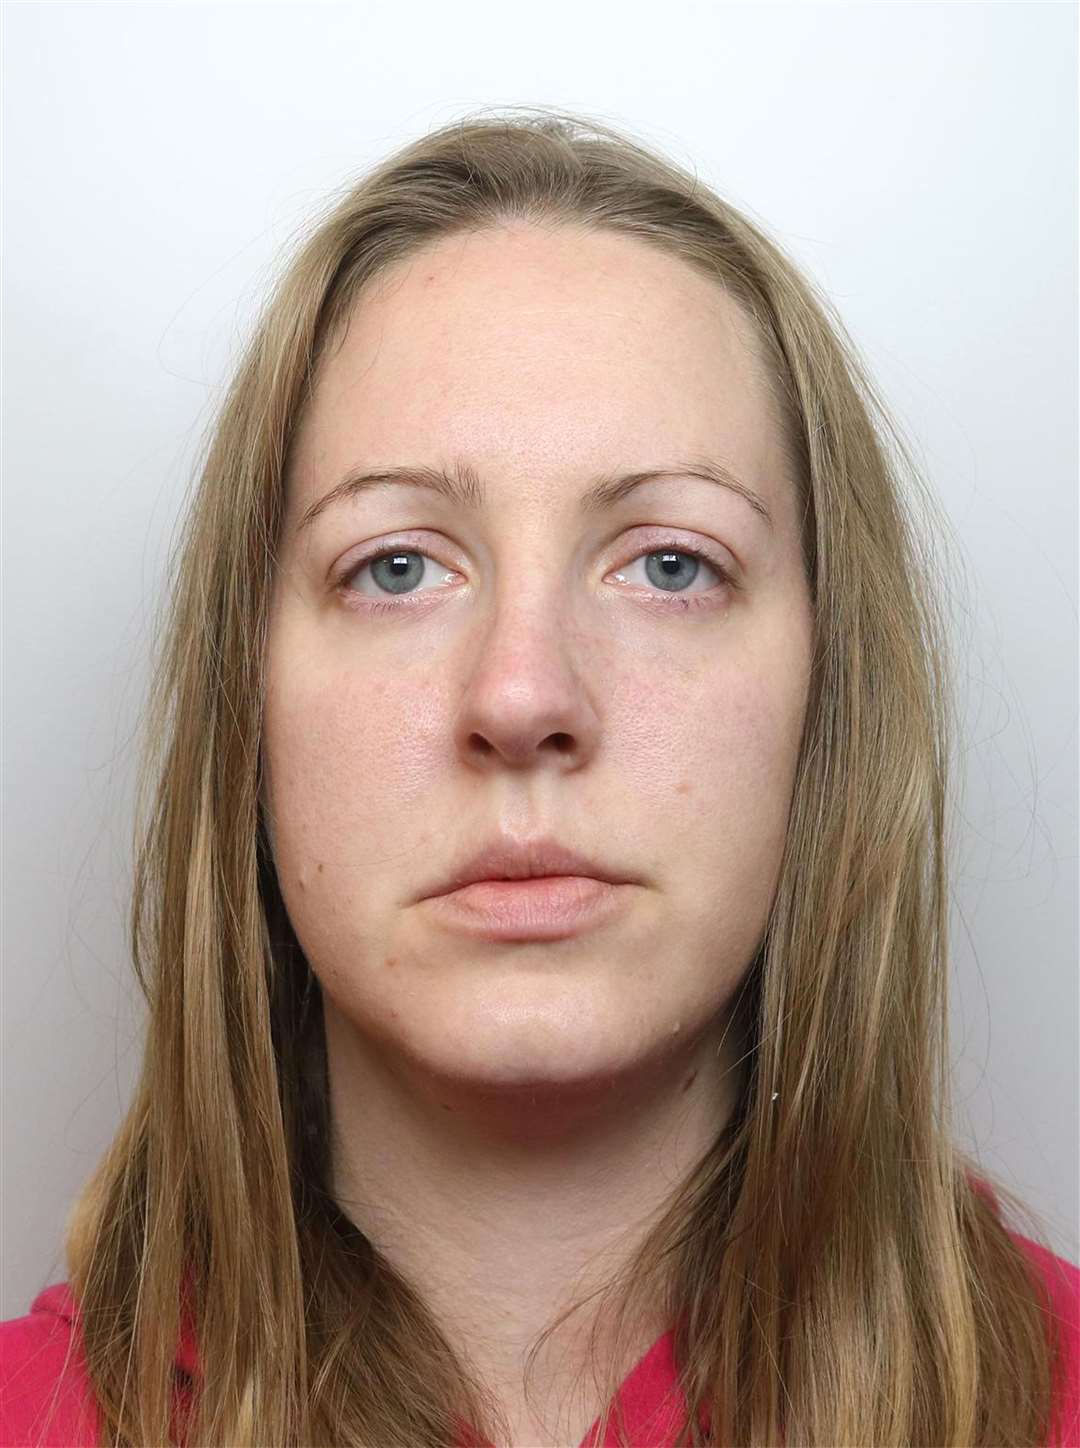 Child serial killer Lucy Letby will face the rest of her life behind bars, becoming only the fourth woman in UK history to receive such a punishment (Cheshire Constabulary/PA)